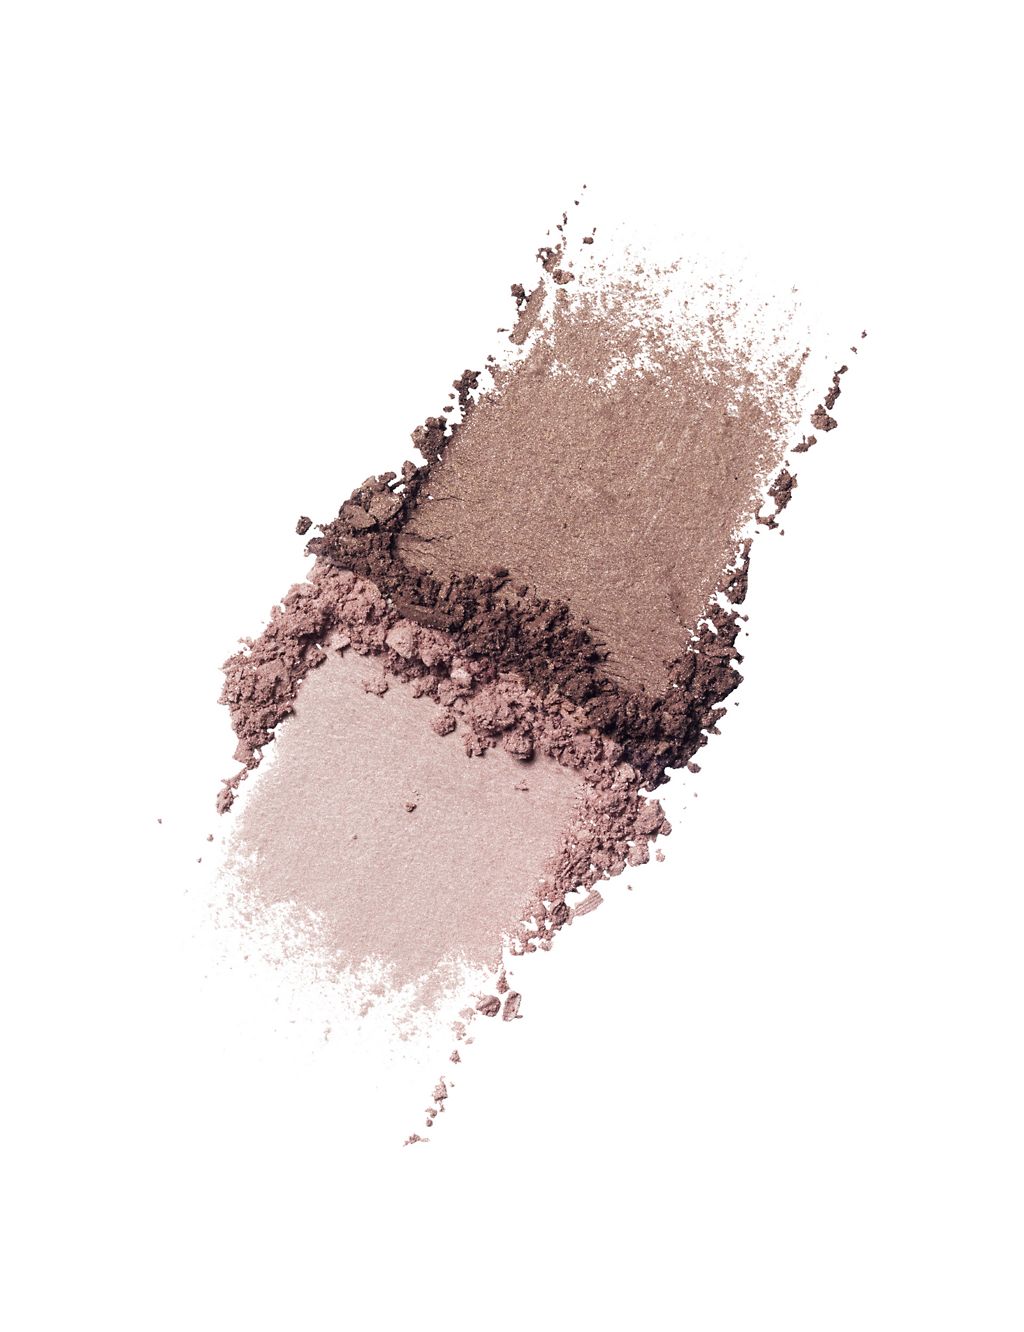 All About Shadow™ Duo Eyeshadow 2.2g 1 of 3